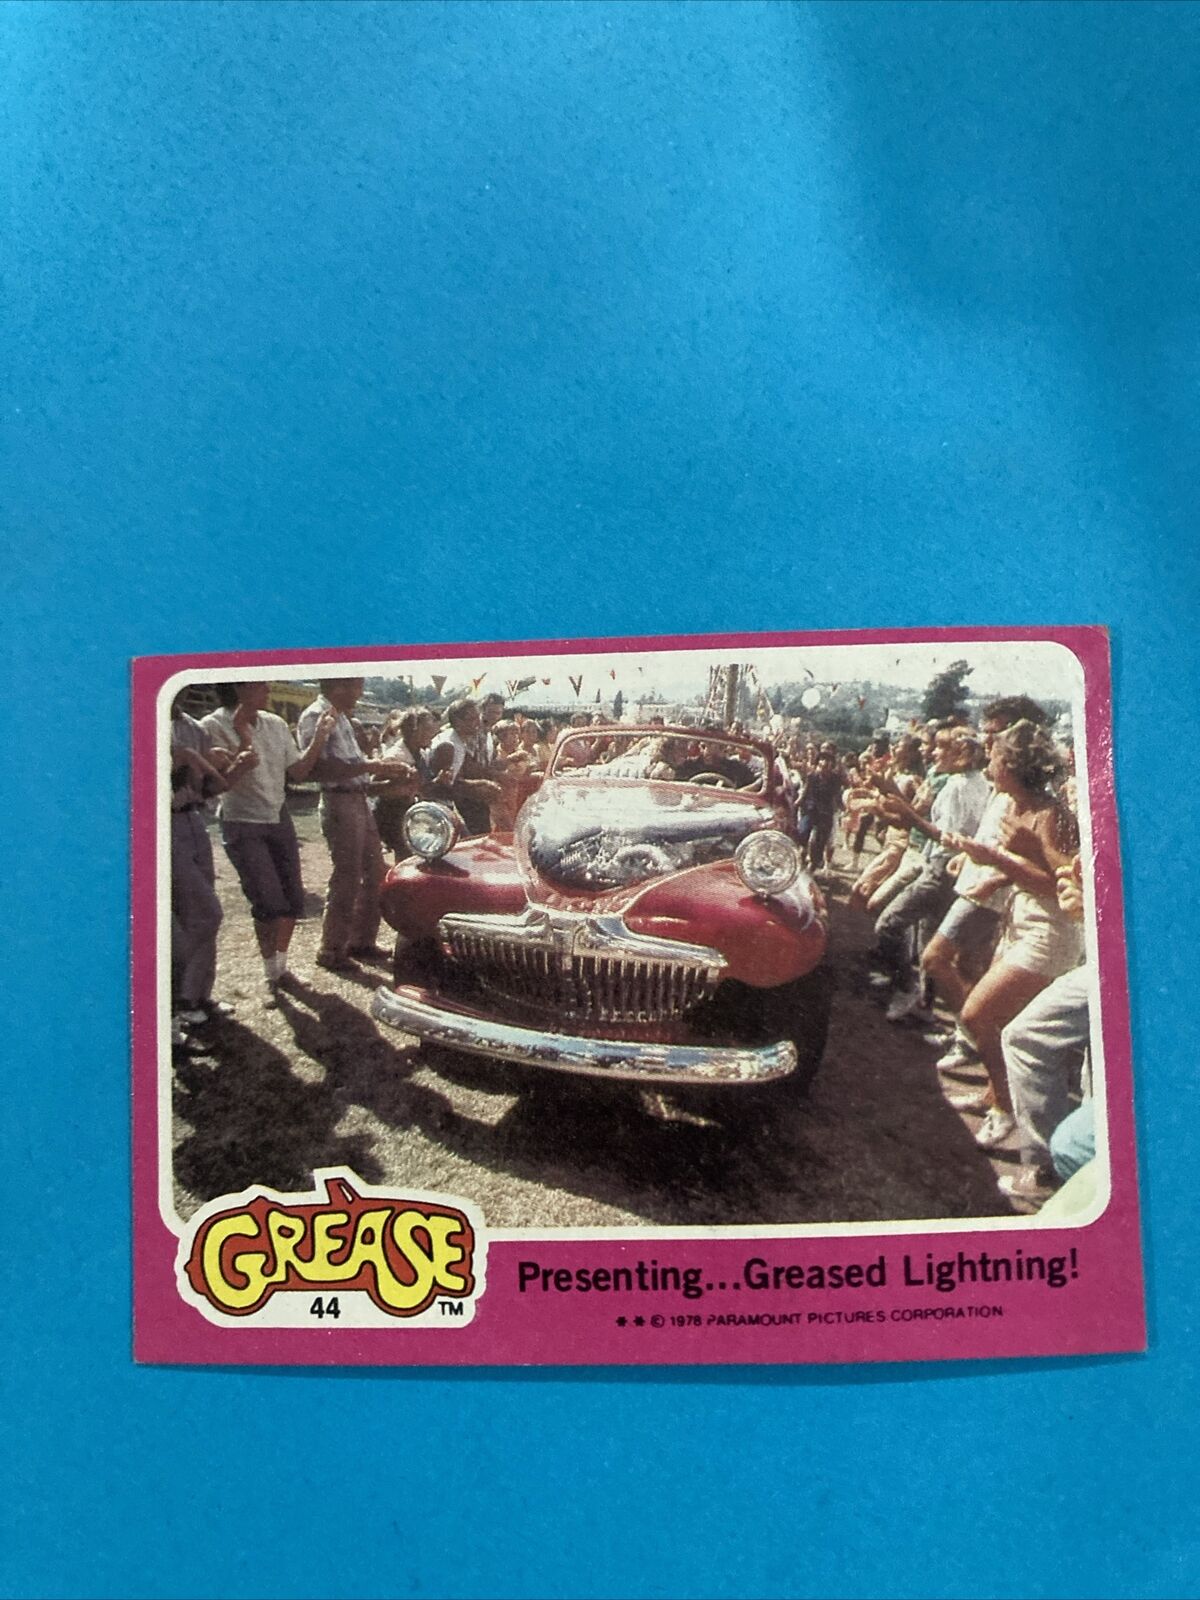 1978 GREASE TRADING CARD #44 Presenting... Greased Lightning